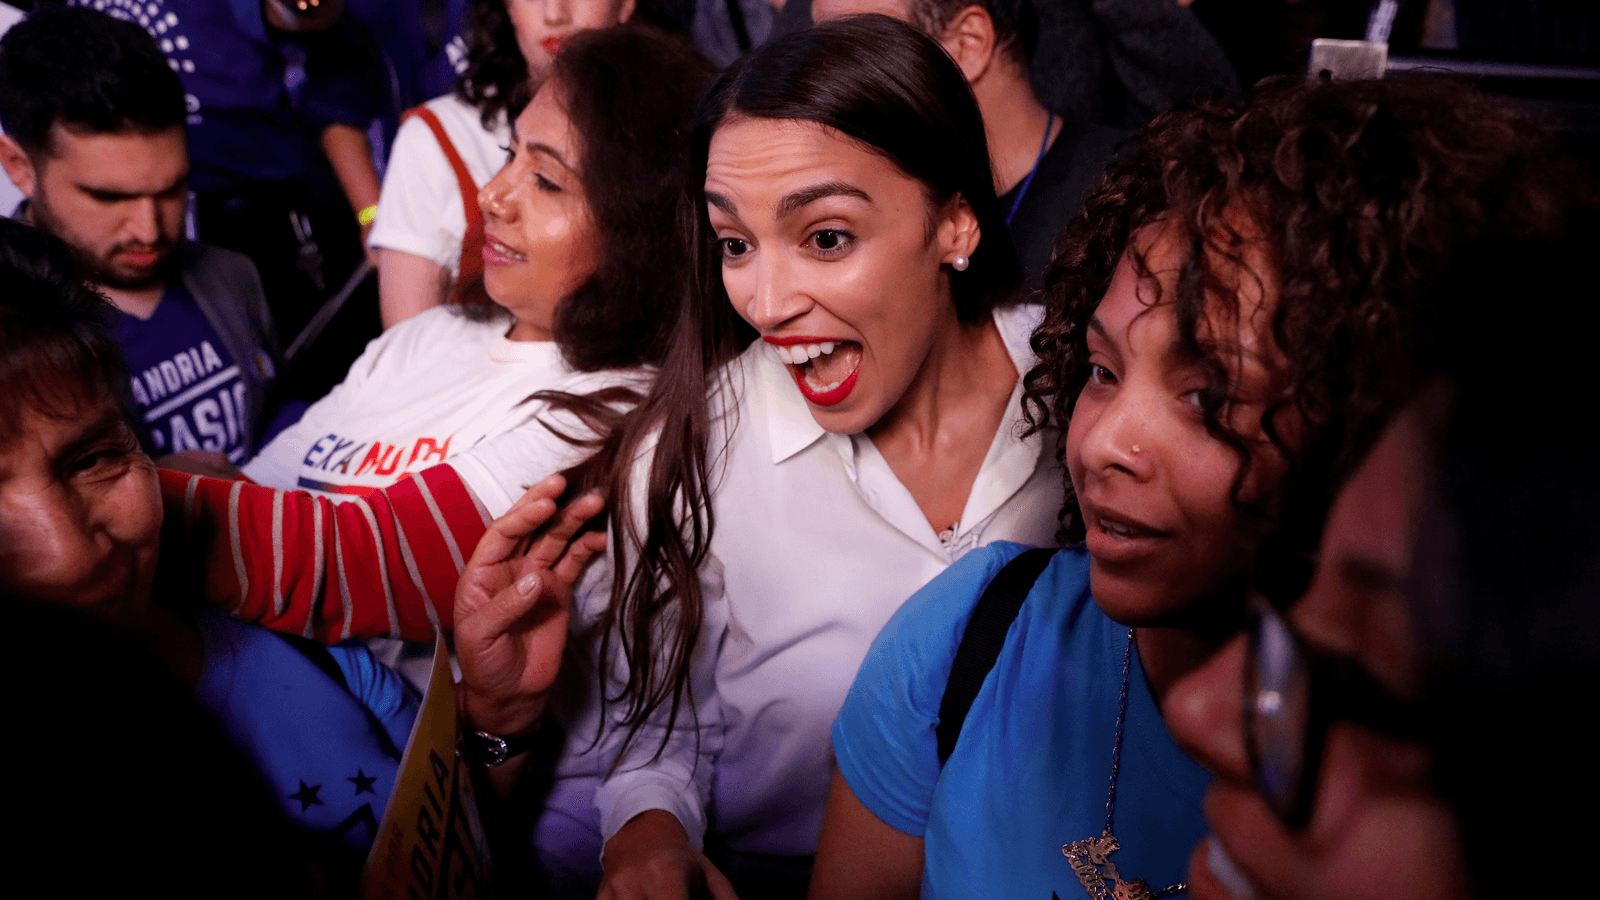 Alexandria Ocasio-Cortez greets supporters at her midterm election night party